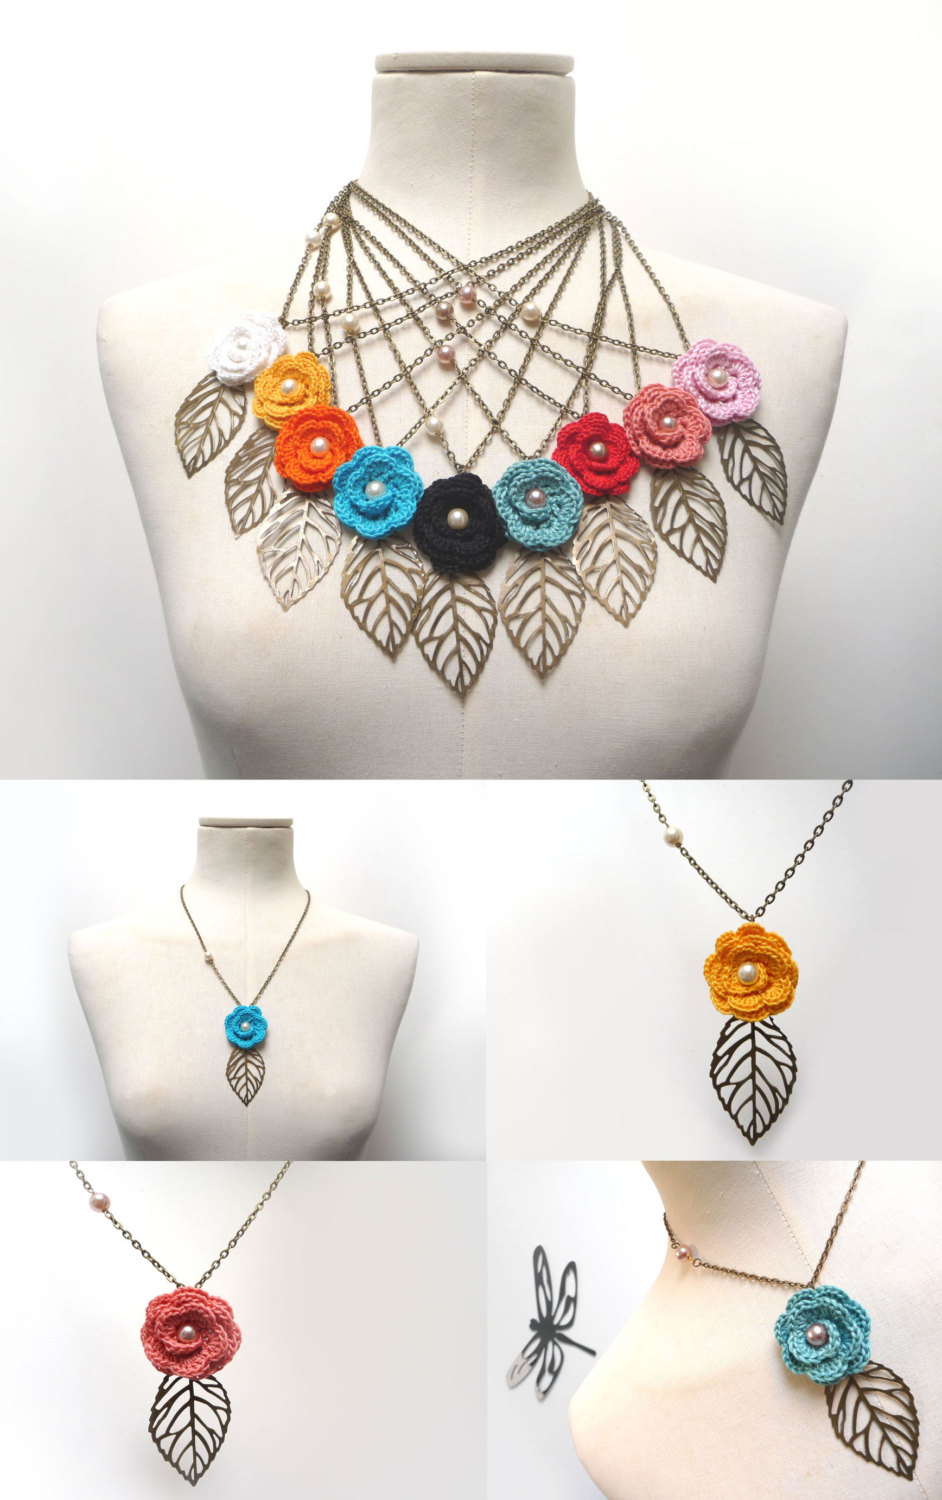 Crochet Flower Necklace With Brass Chain And Leaf - Cotton Flower With Metal Leaf And Pearls - Choose The Color